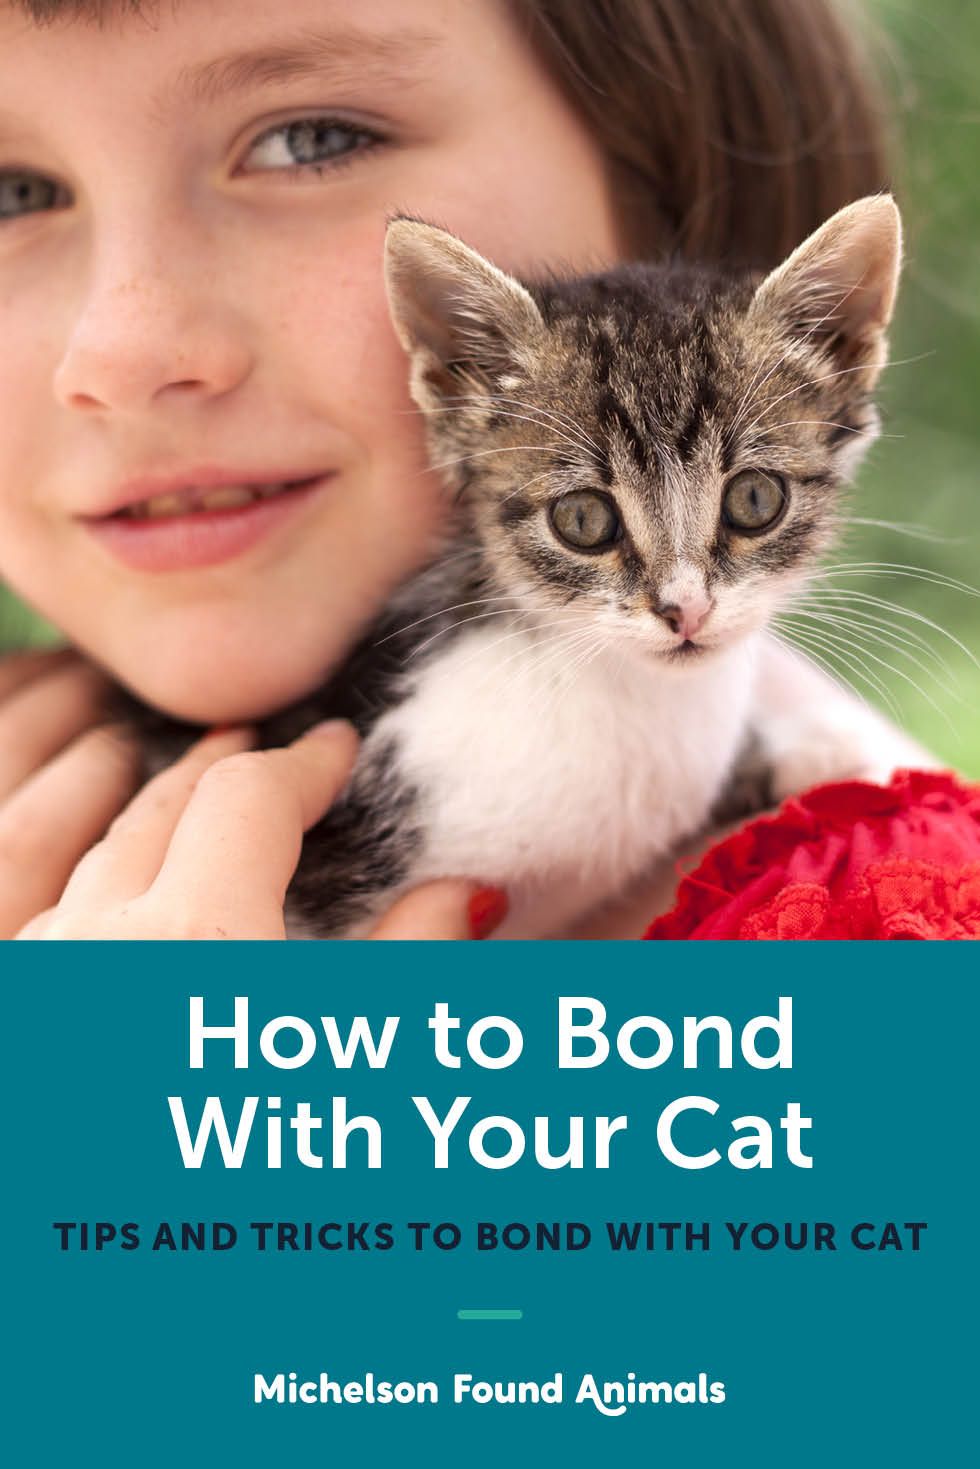 How to Bond With Your Cat